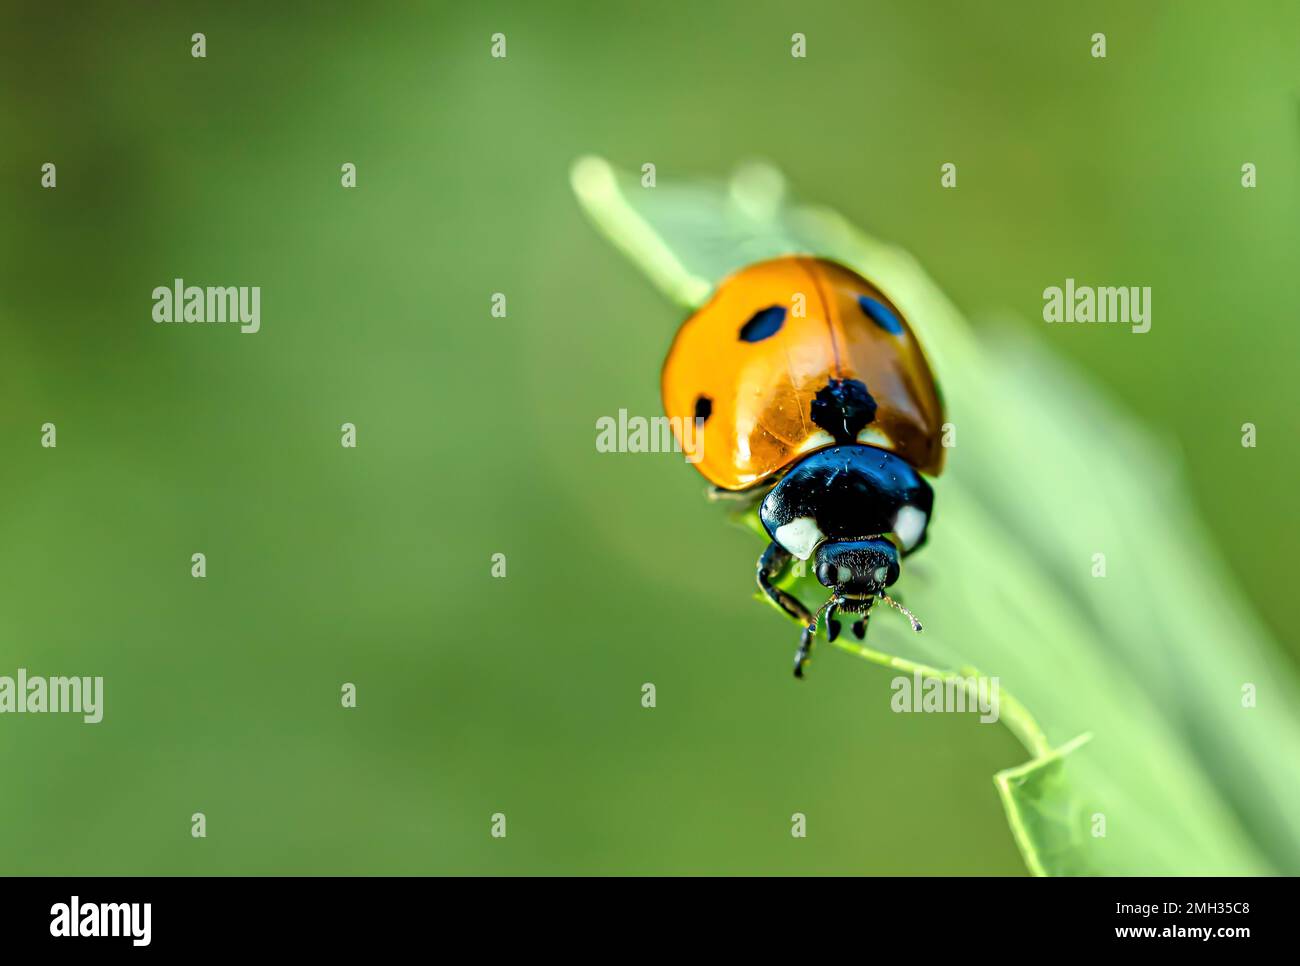 Tthe lovely ladybug, photographed on a green leaf looking for aphids Stock Photo